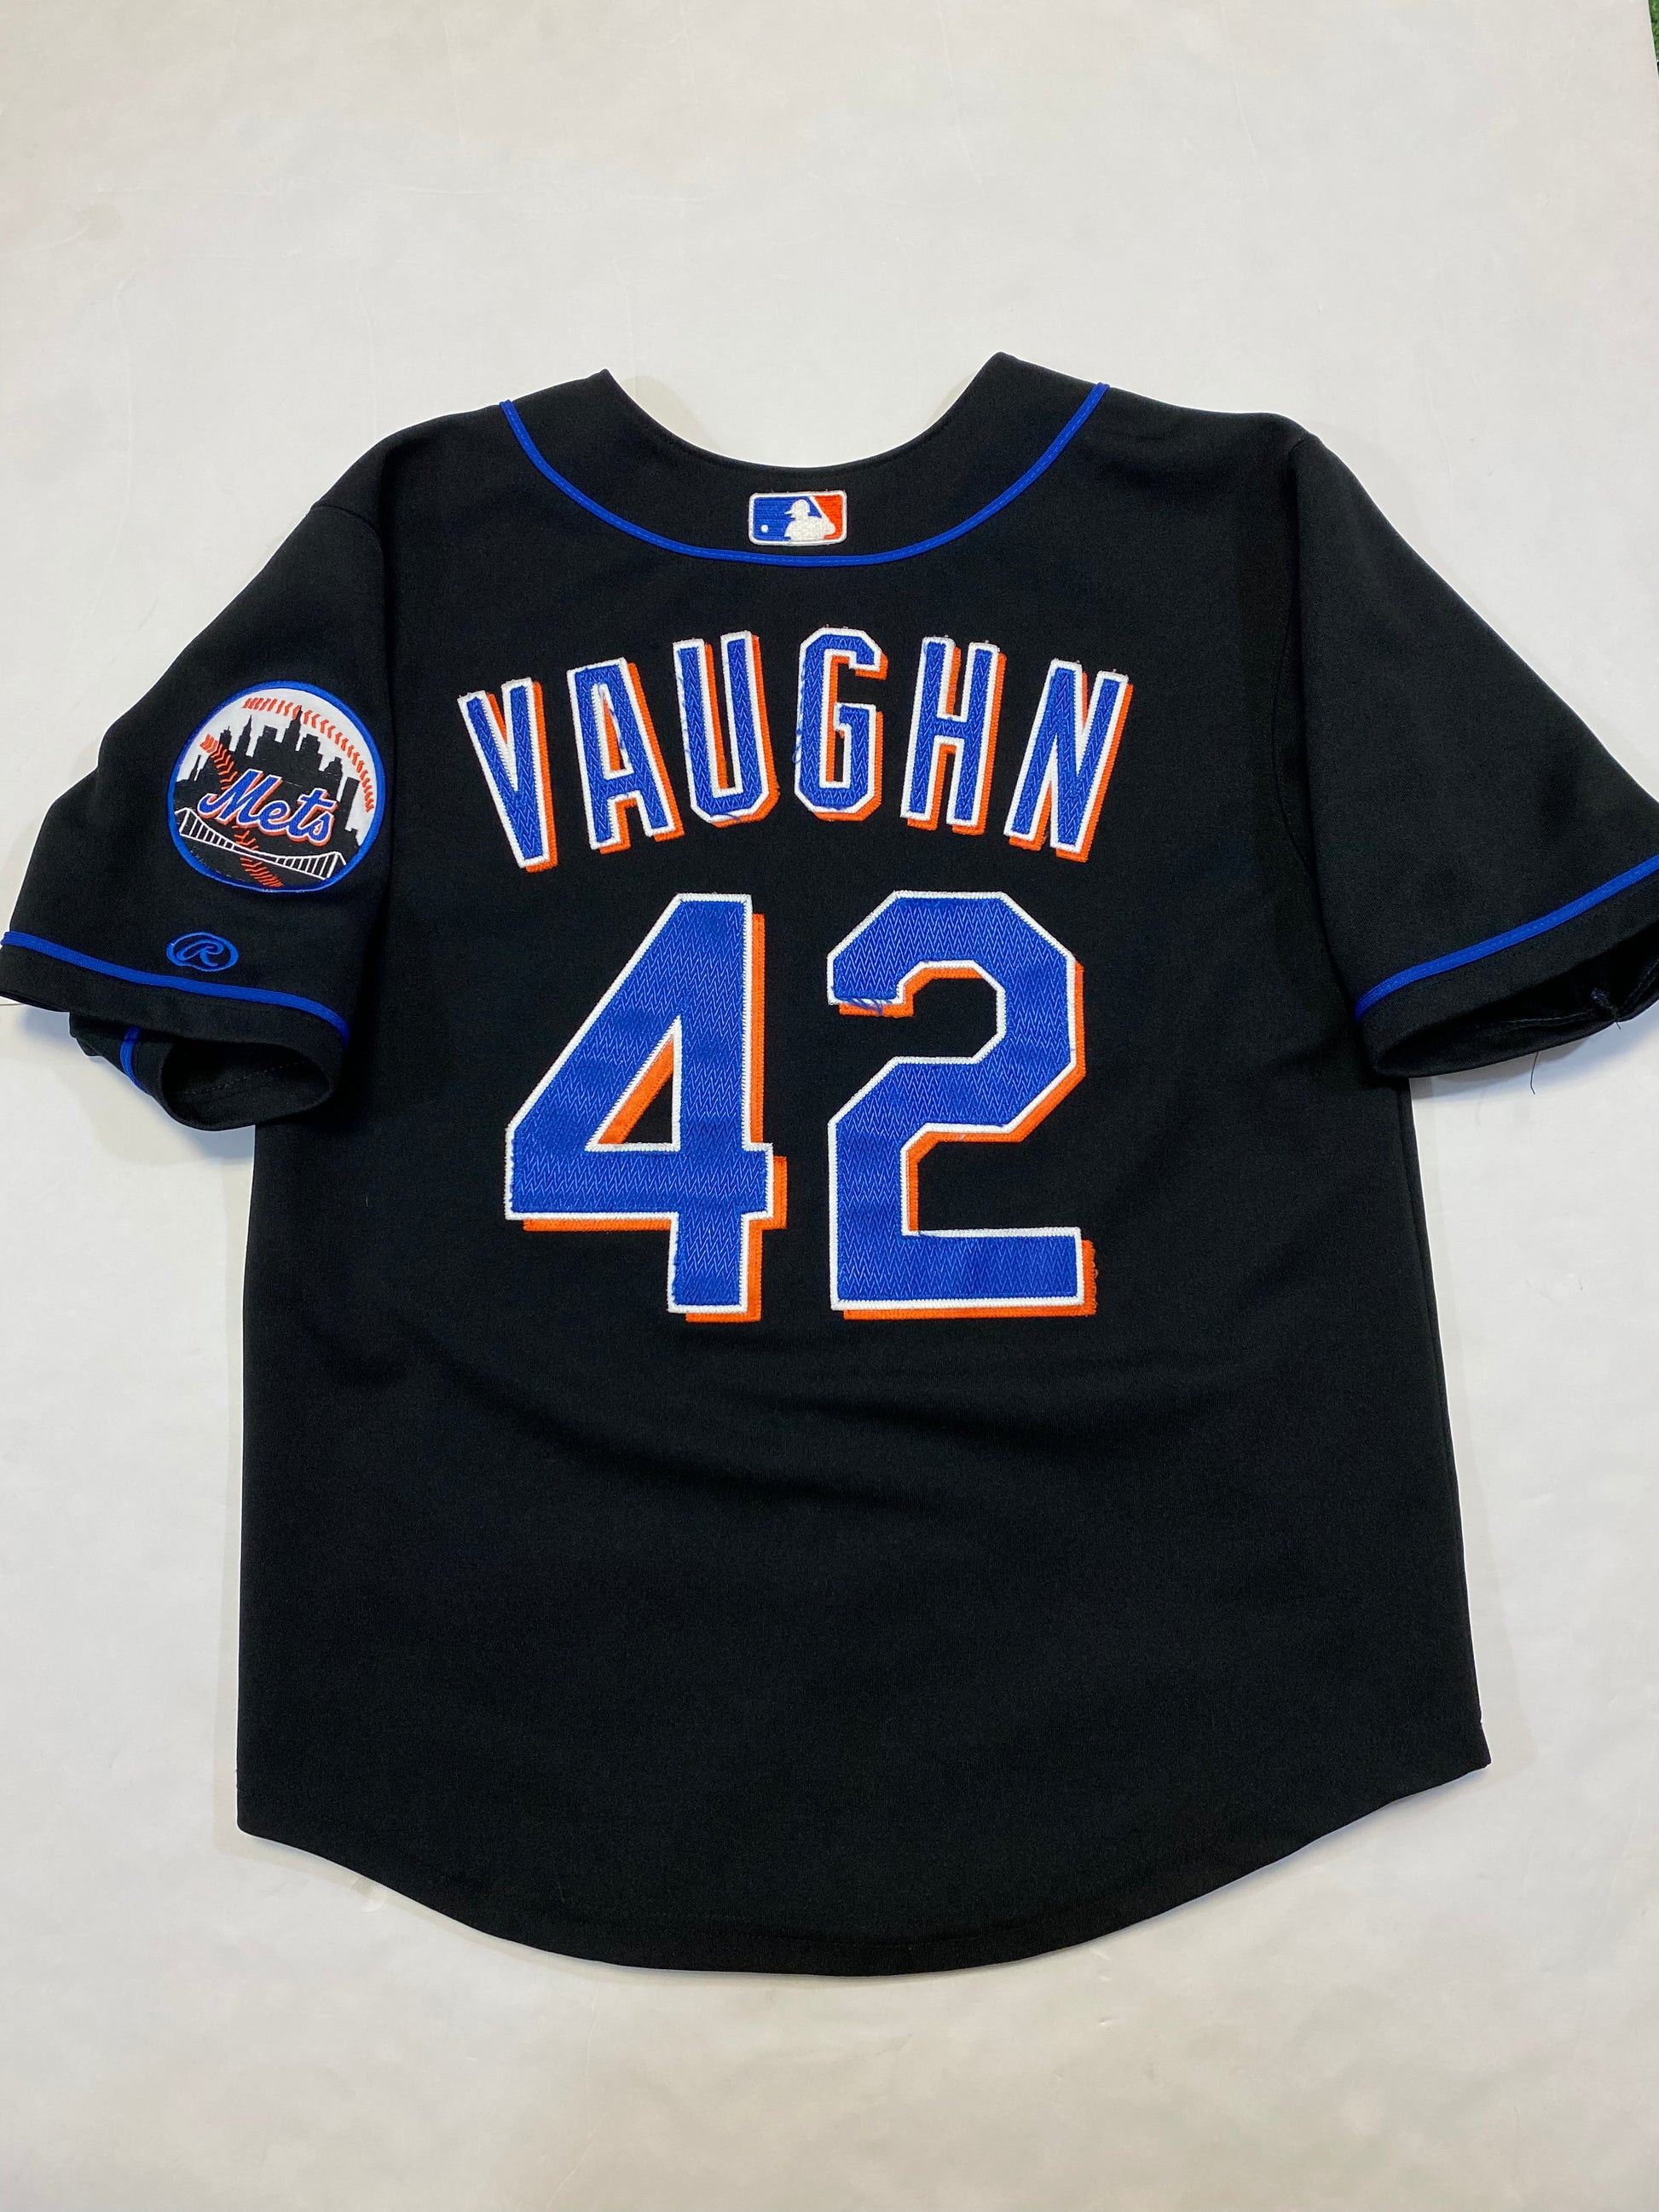 Youth Rawlings Authentic Mo Vaughn New York Mets Jersey